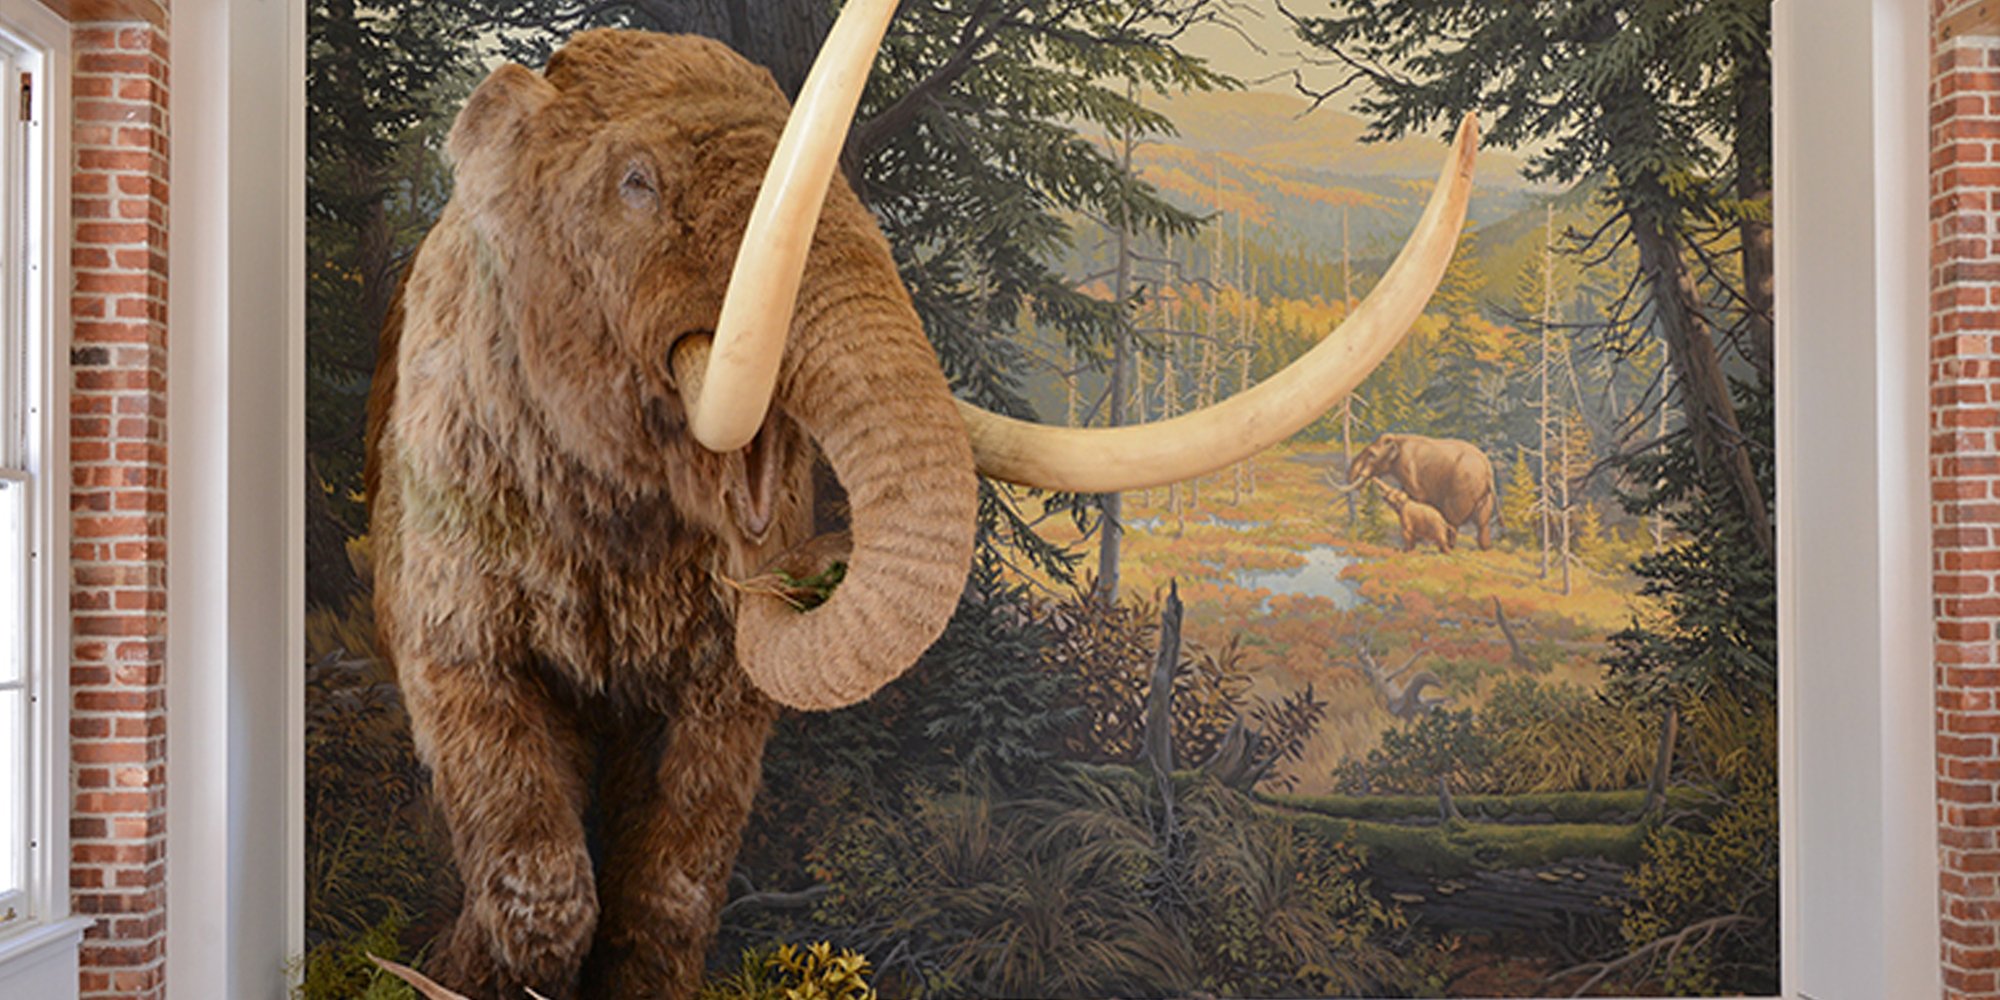 A large mastodon replica emerging through a forest mural on the wall.